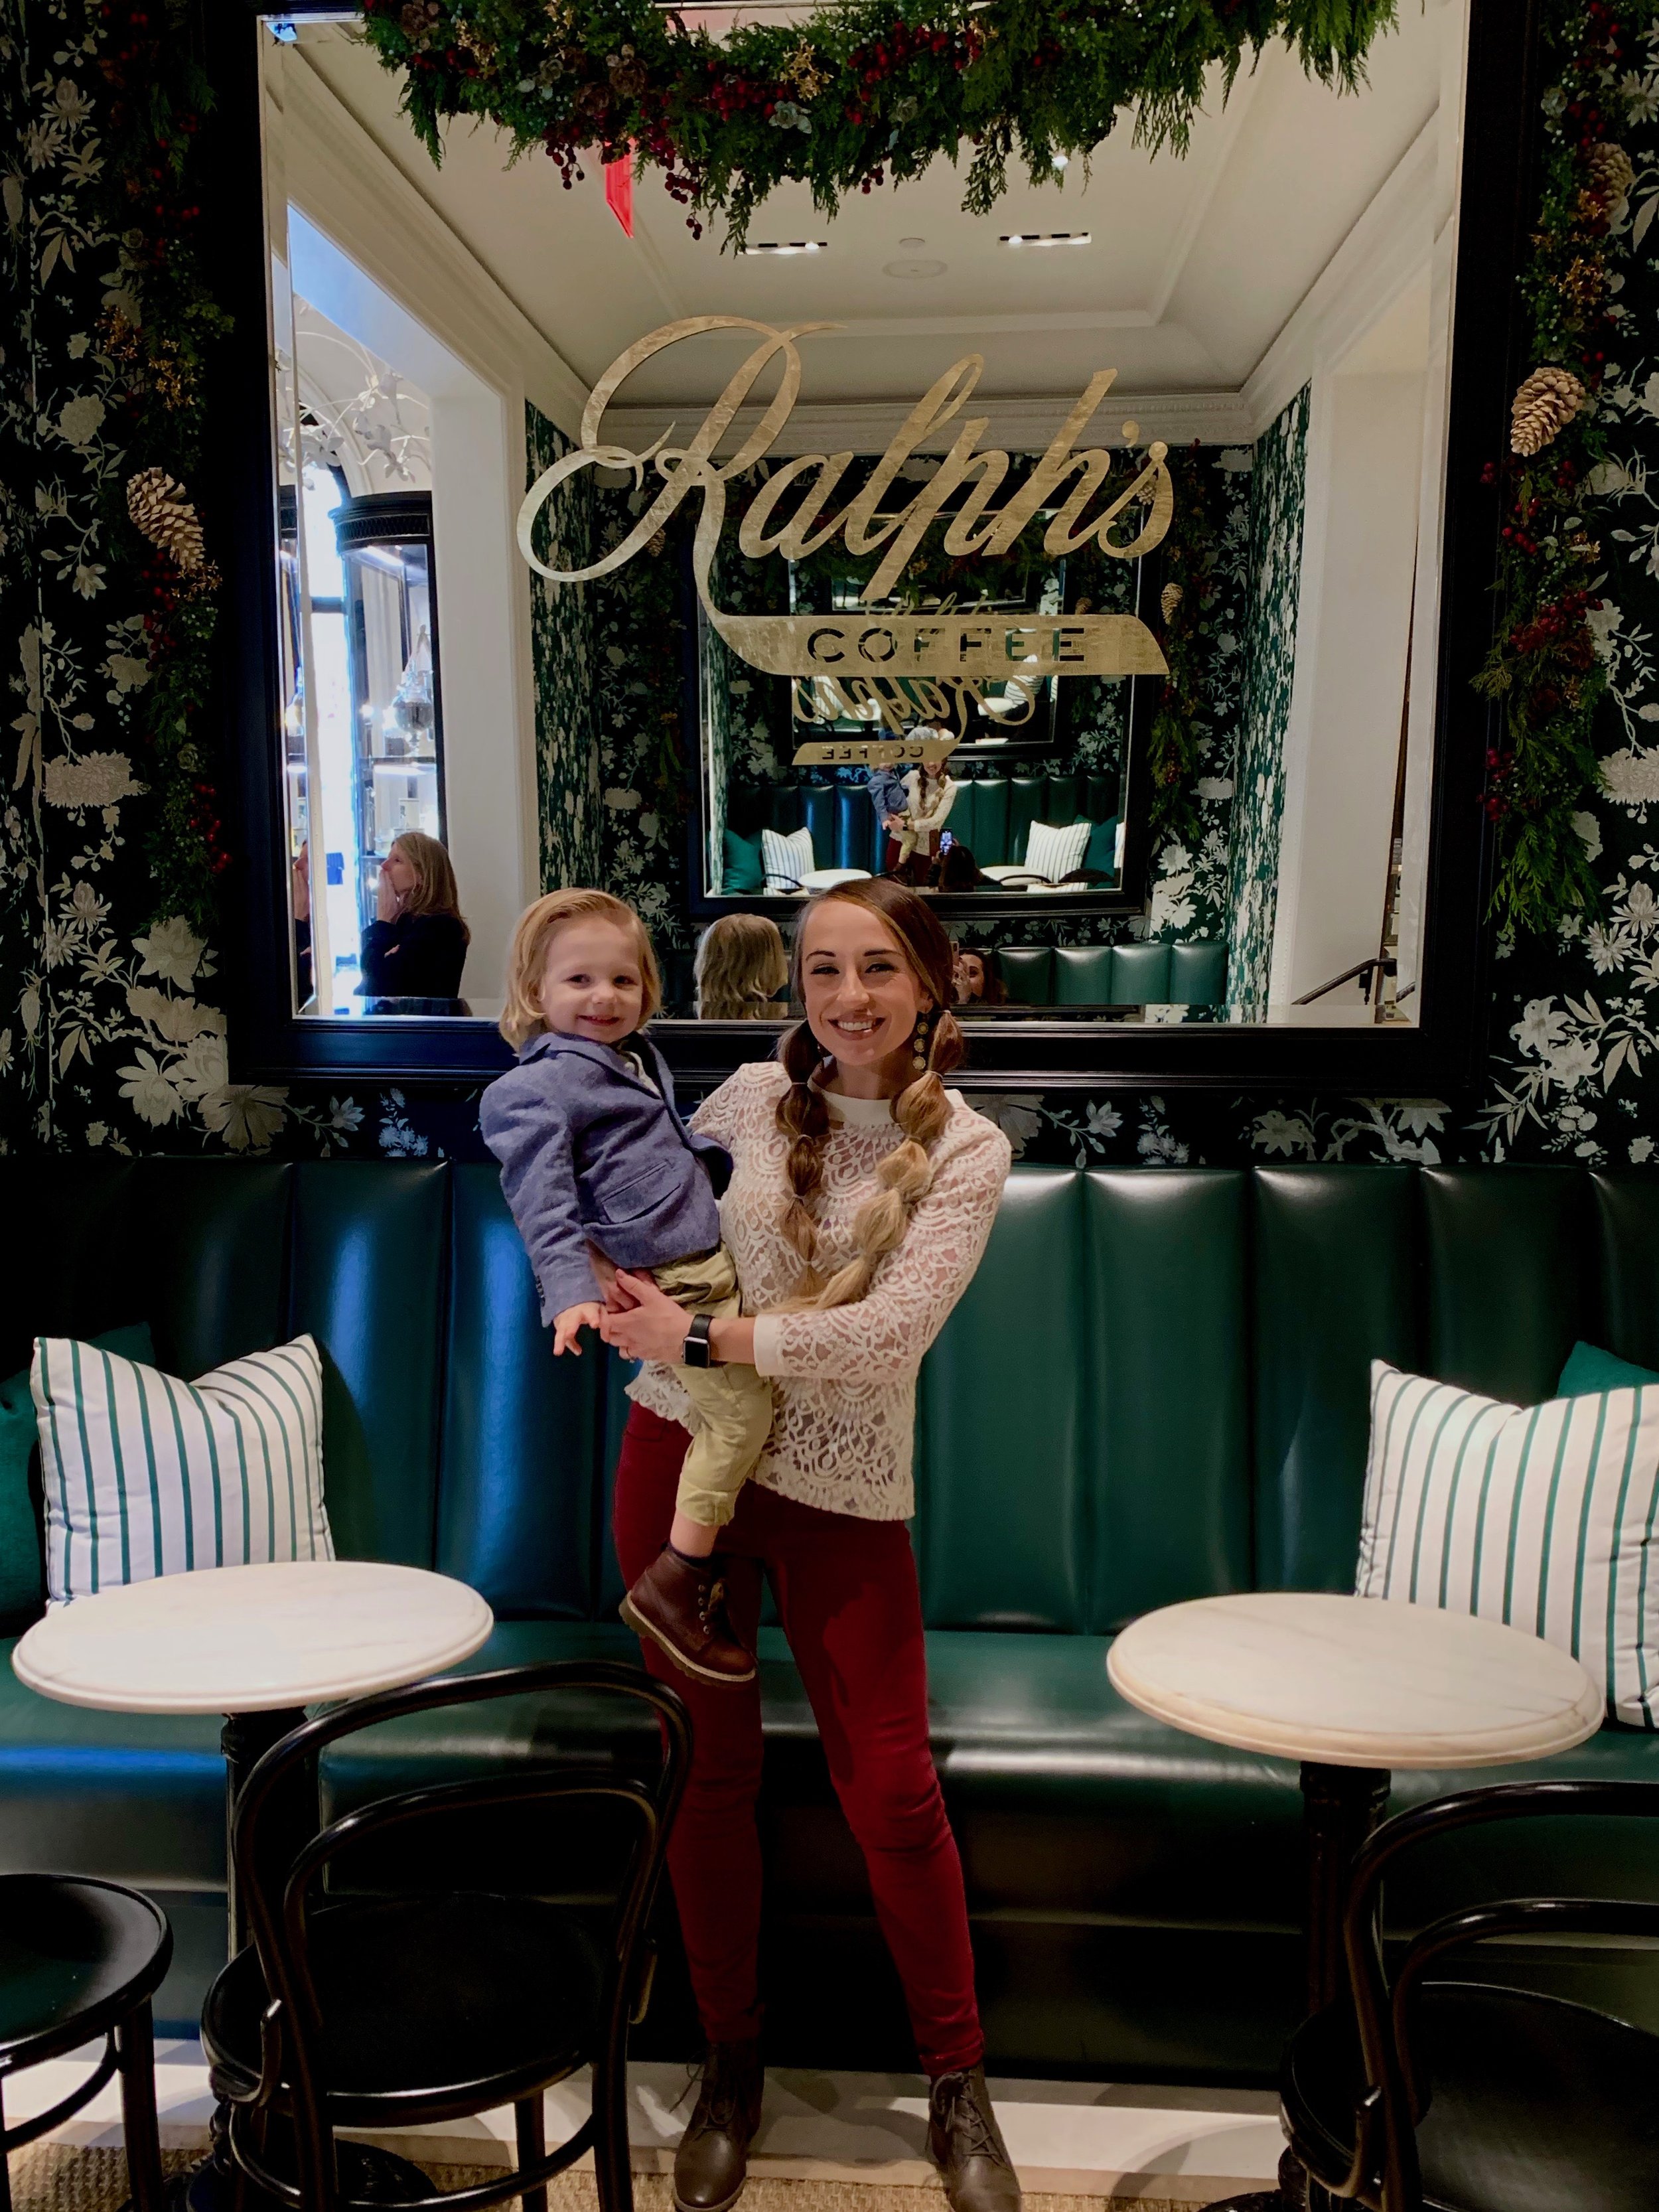 Ralph's Coffee – Upper East Side, New 